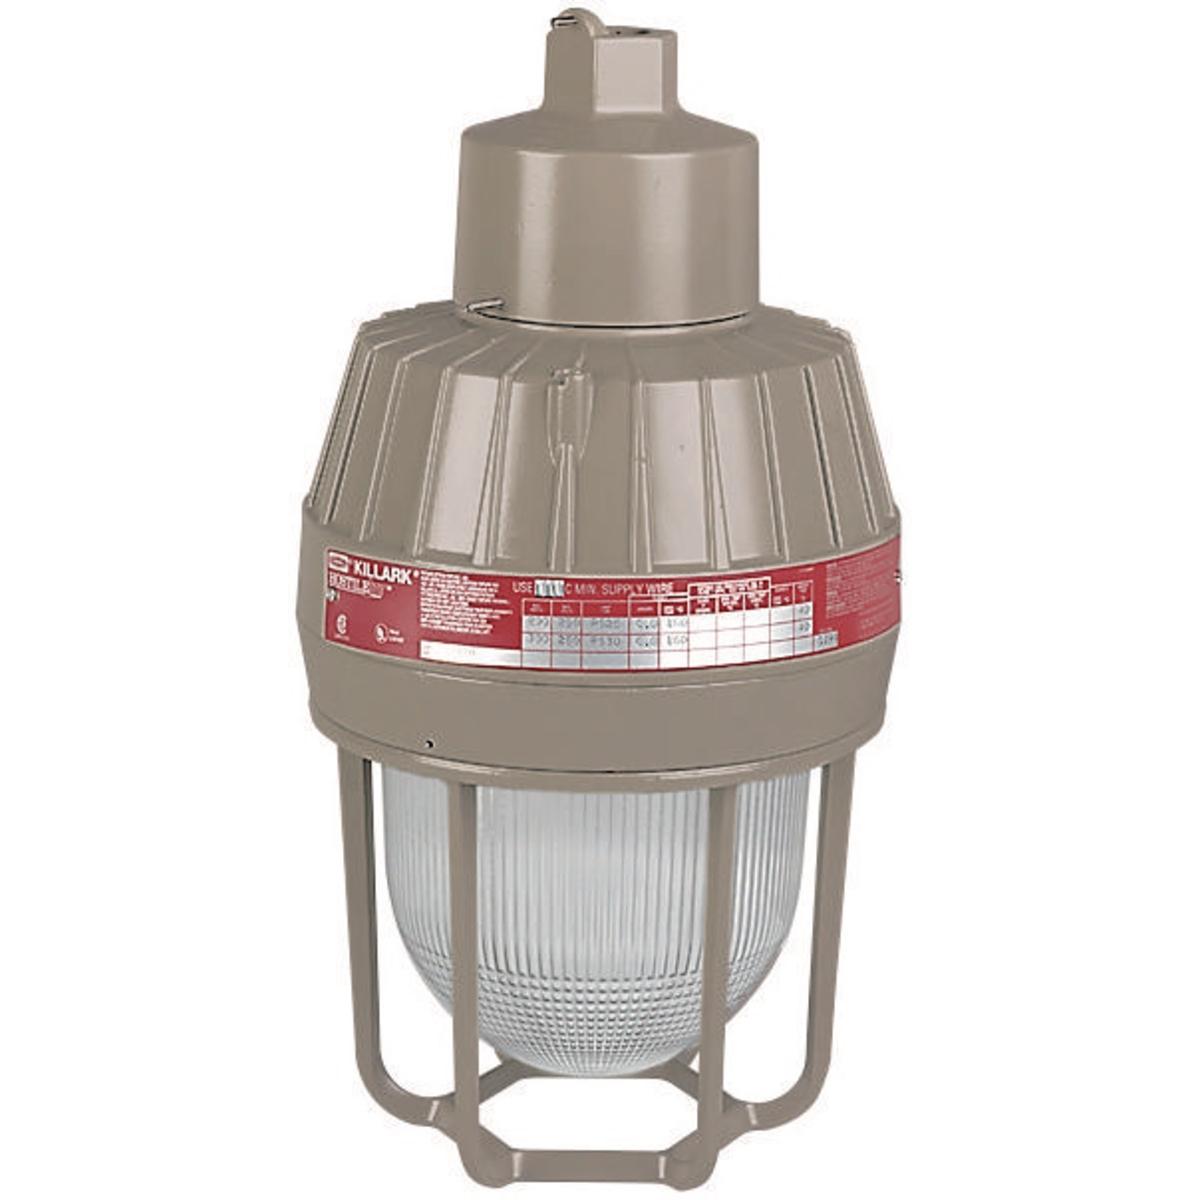 Hubbell EMI20A3 Incandescent 200W 1" Pendant  ; Four light sources—Incandescent, compact fluorescent, high pressure sodium and metal halide ; Mounting choice—Pendant, ceiling, 25˚ stanchion or 90˚ wall mount, all with “wireless” design that allows fast, easy fixture inst